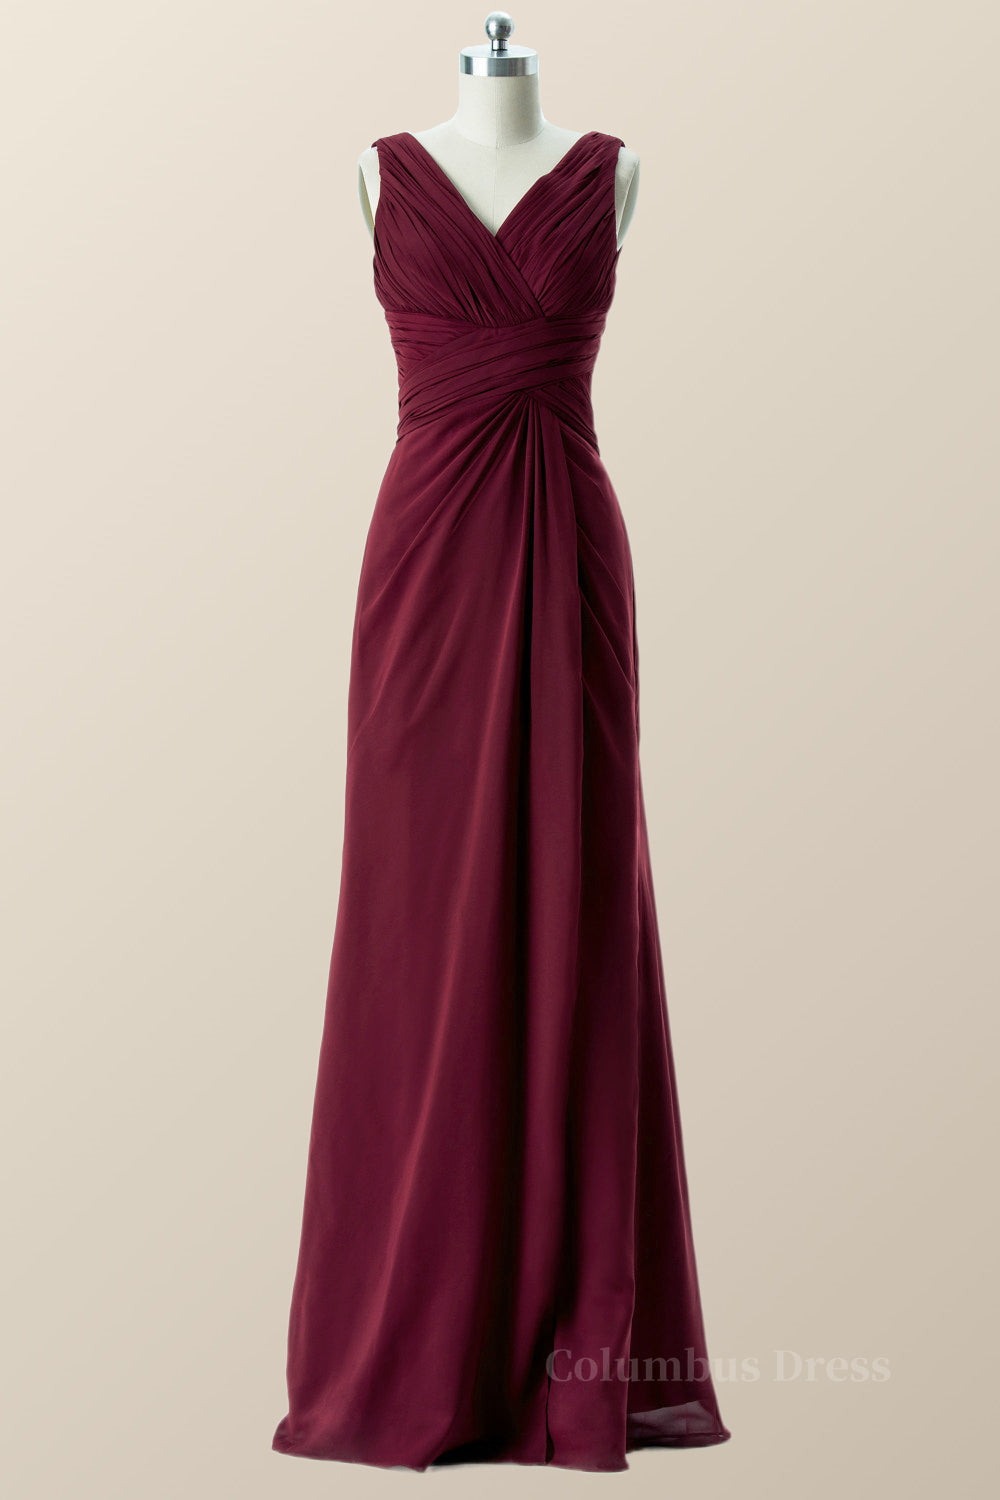 Pleated Burgundy Chiffon Long Corset Bridesmaid Dress outfit, Prom Dresses Ball Gown Elegant